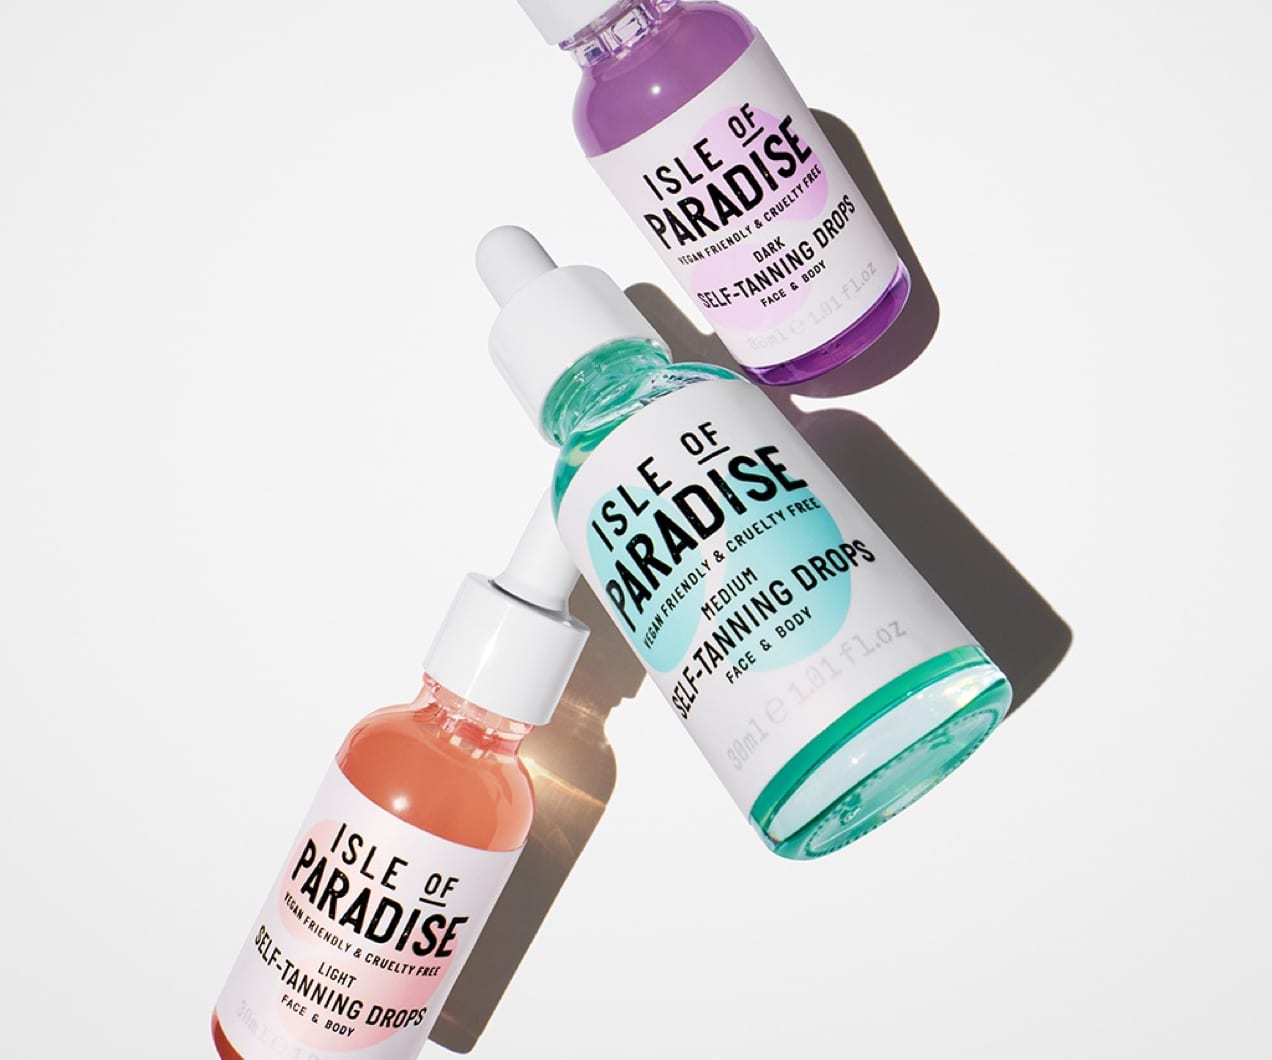 bottles of self-tanning drops